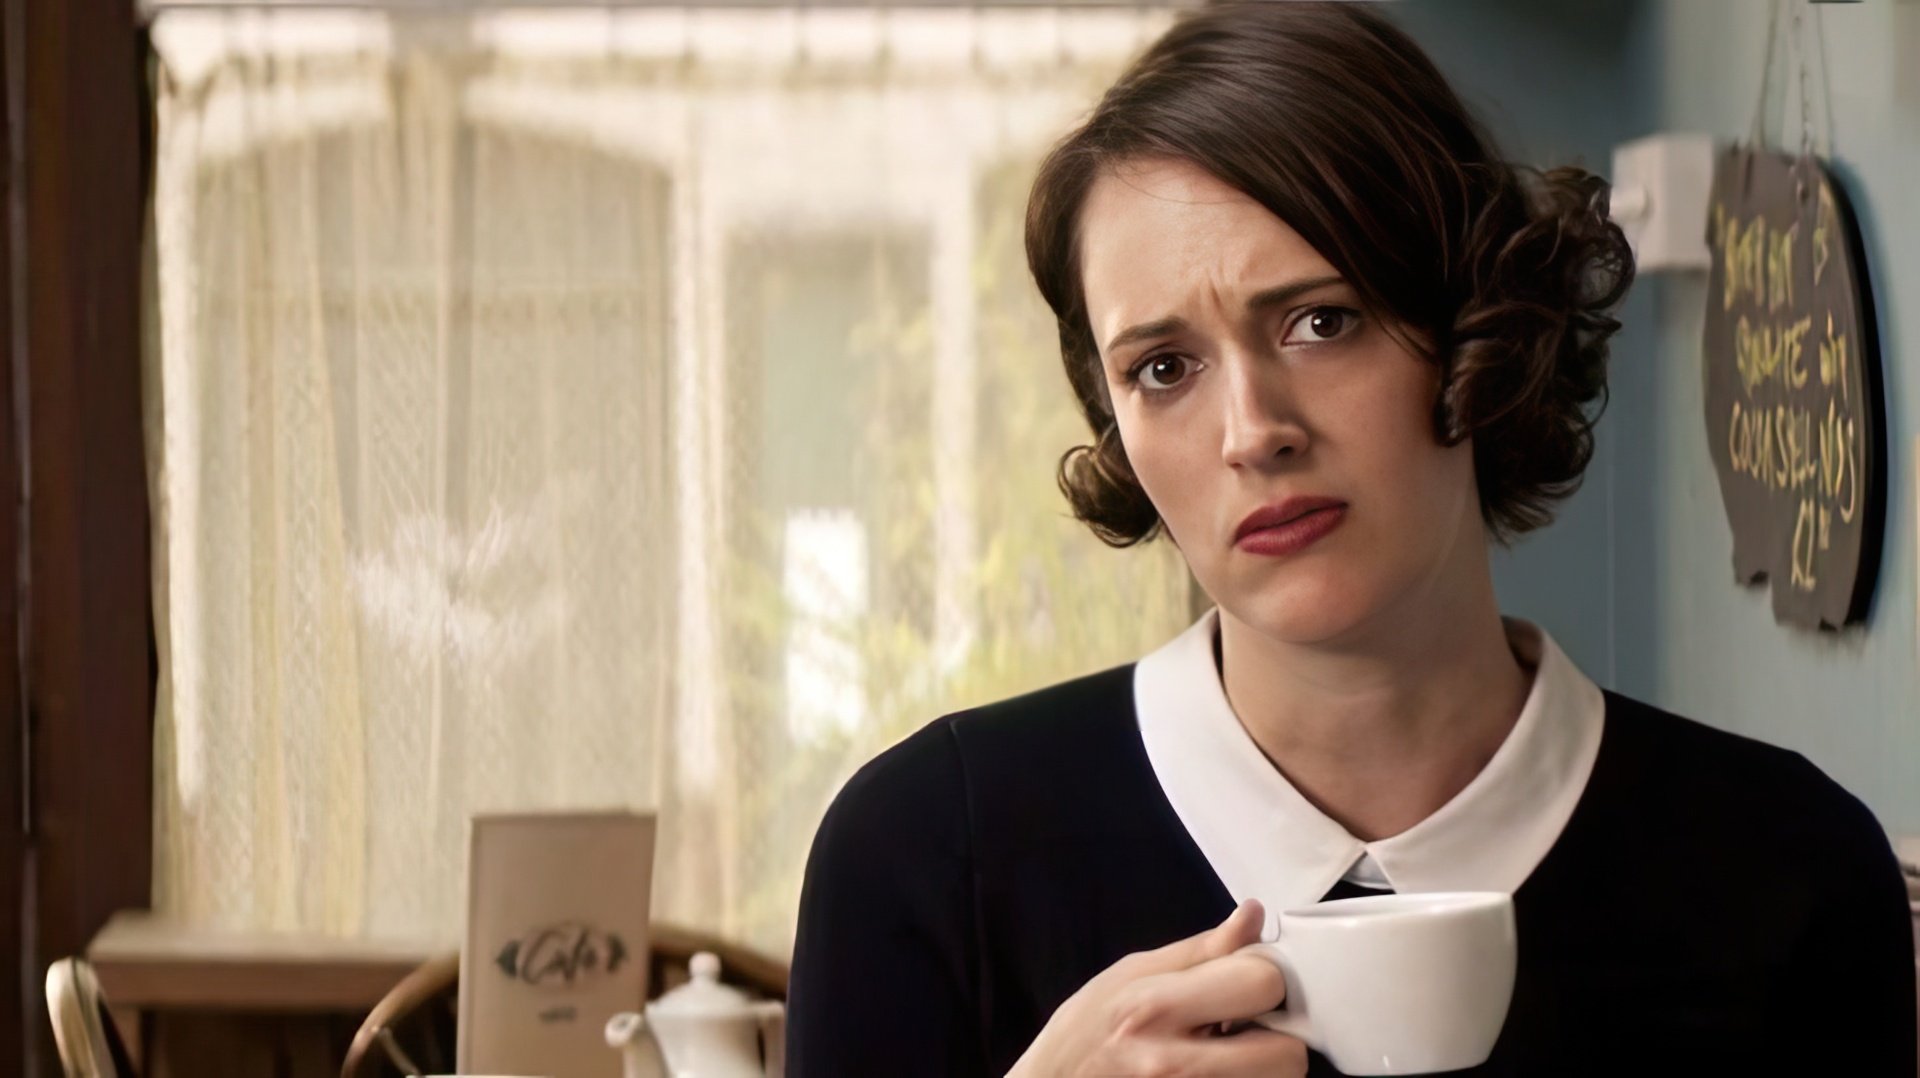 Shot from the series Fleabag